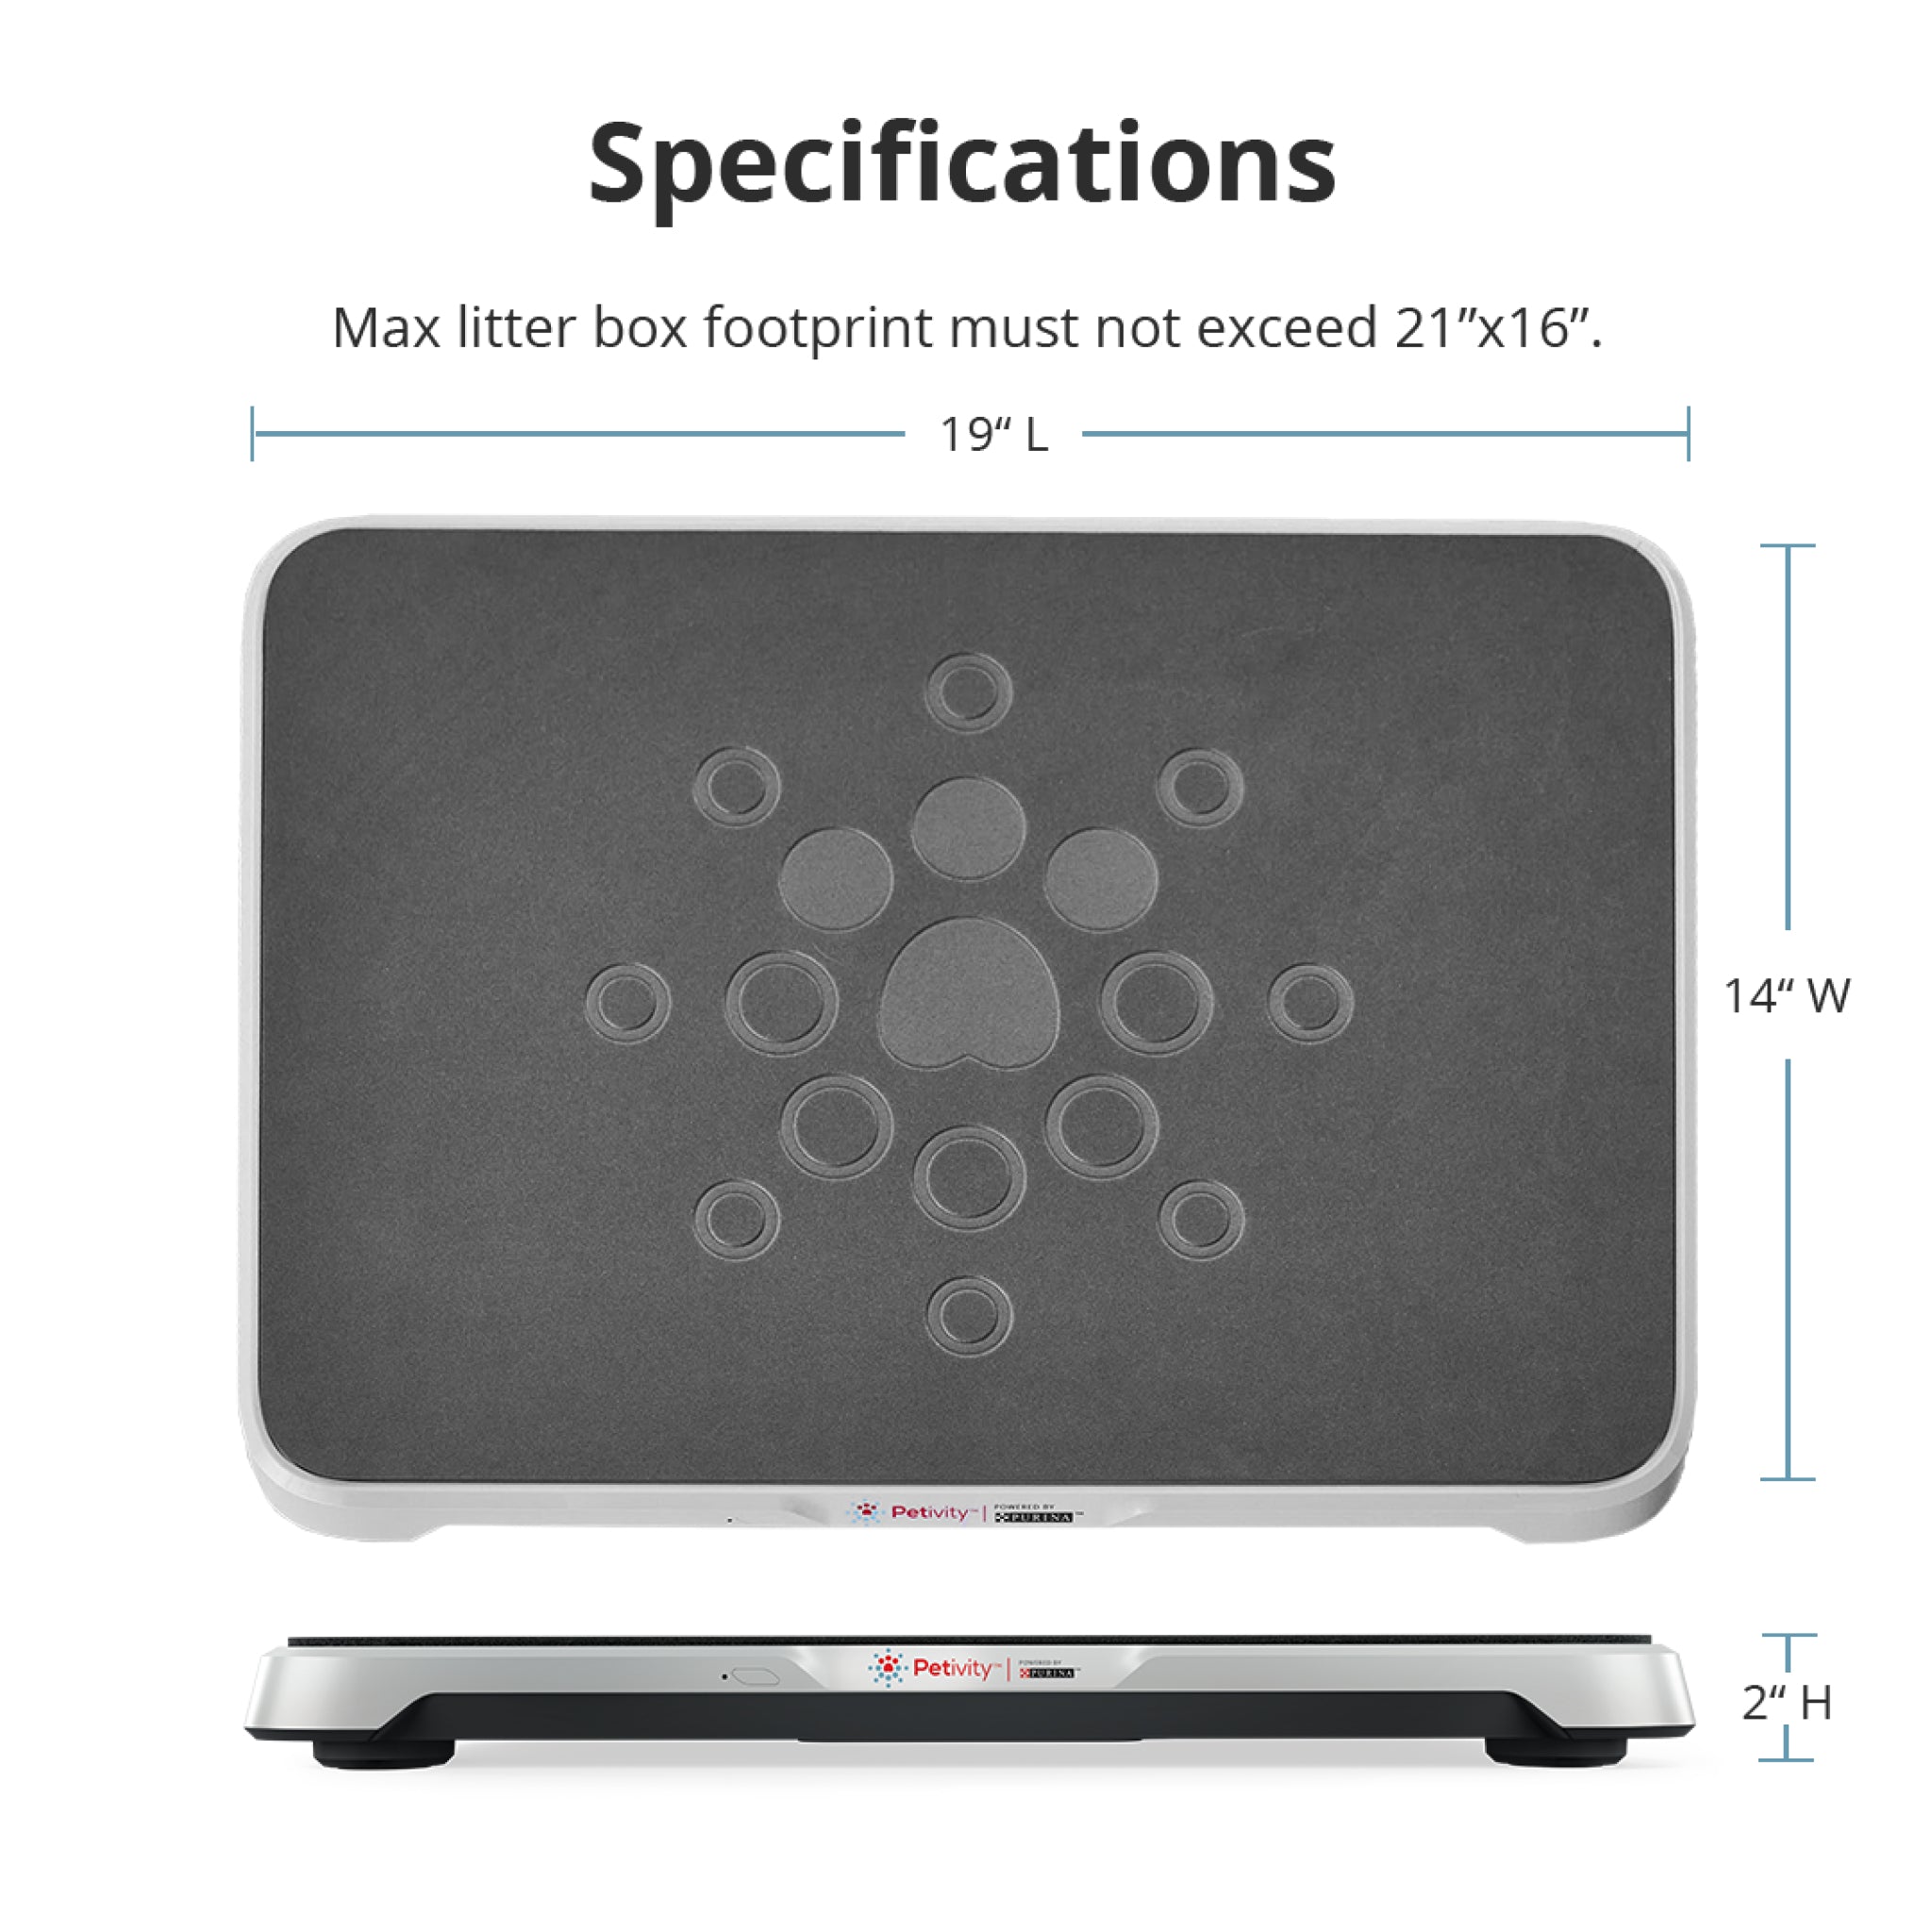 Video: Specifications | Max litterbox footprint must not exceed 21&quot;x16&quot;